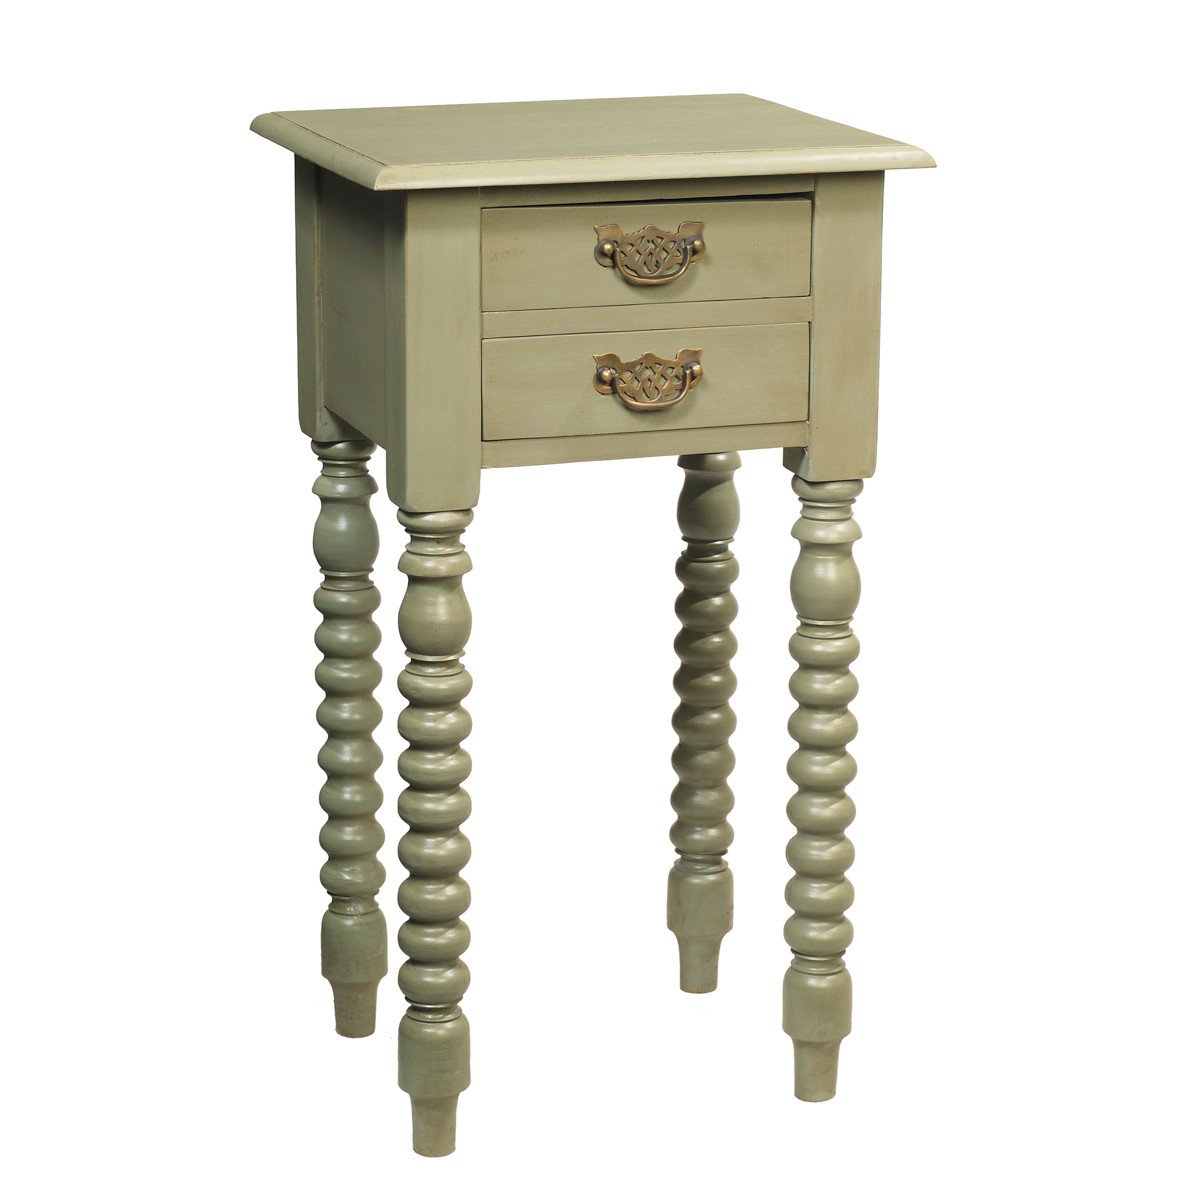 batam accent table green bay wrightwood furniture bobbin martin home furnishings seater patio set white mirrored console wood slab ashley storage world market brown metal coffee